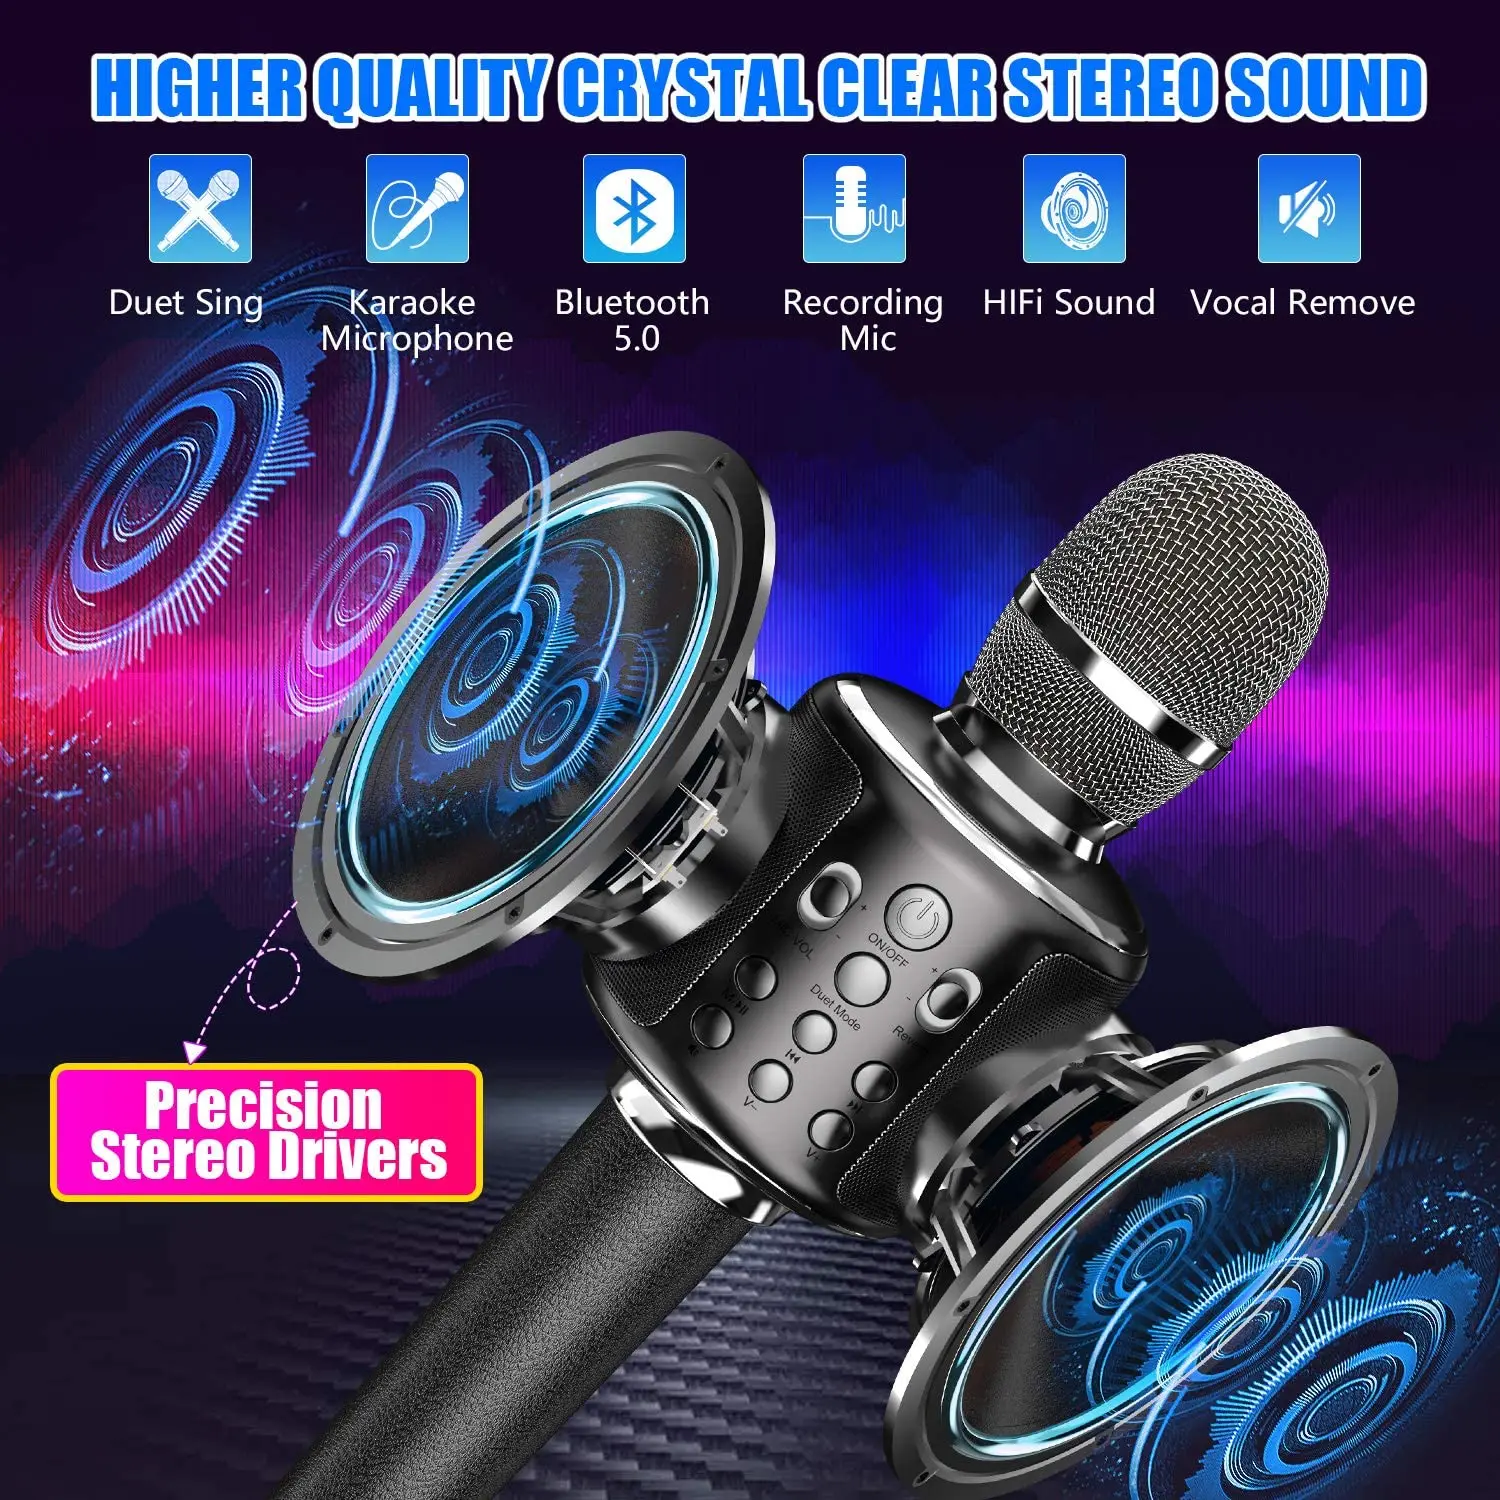 Karaoke Microphone Wireless Singing Machine with Bluetooth Speaker for Cell Phone/PC, Portable Handheld Mic Speaker